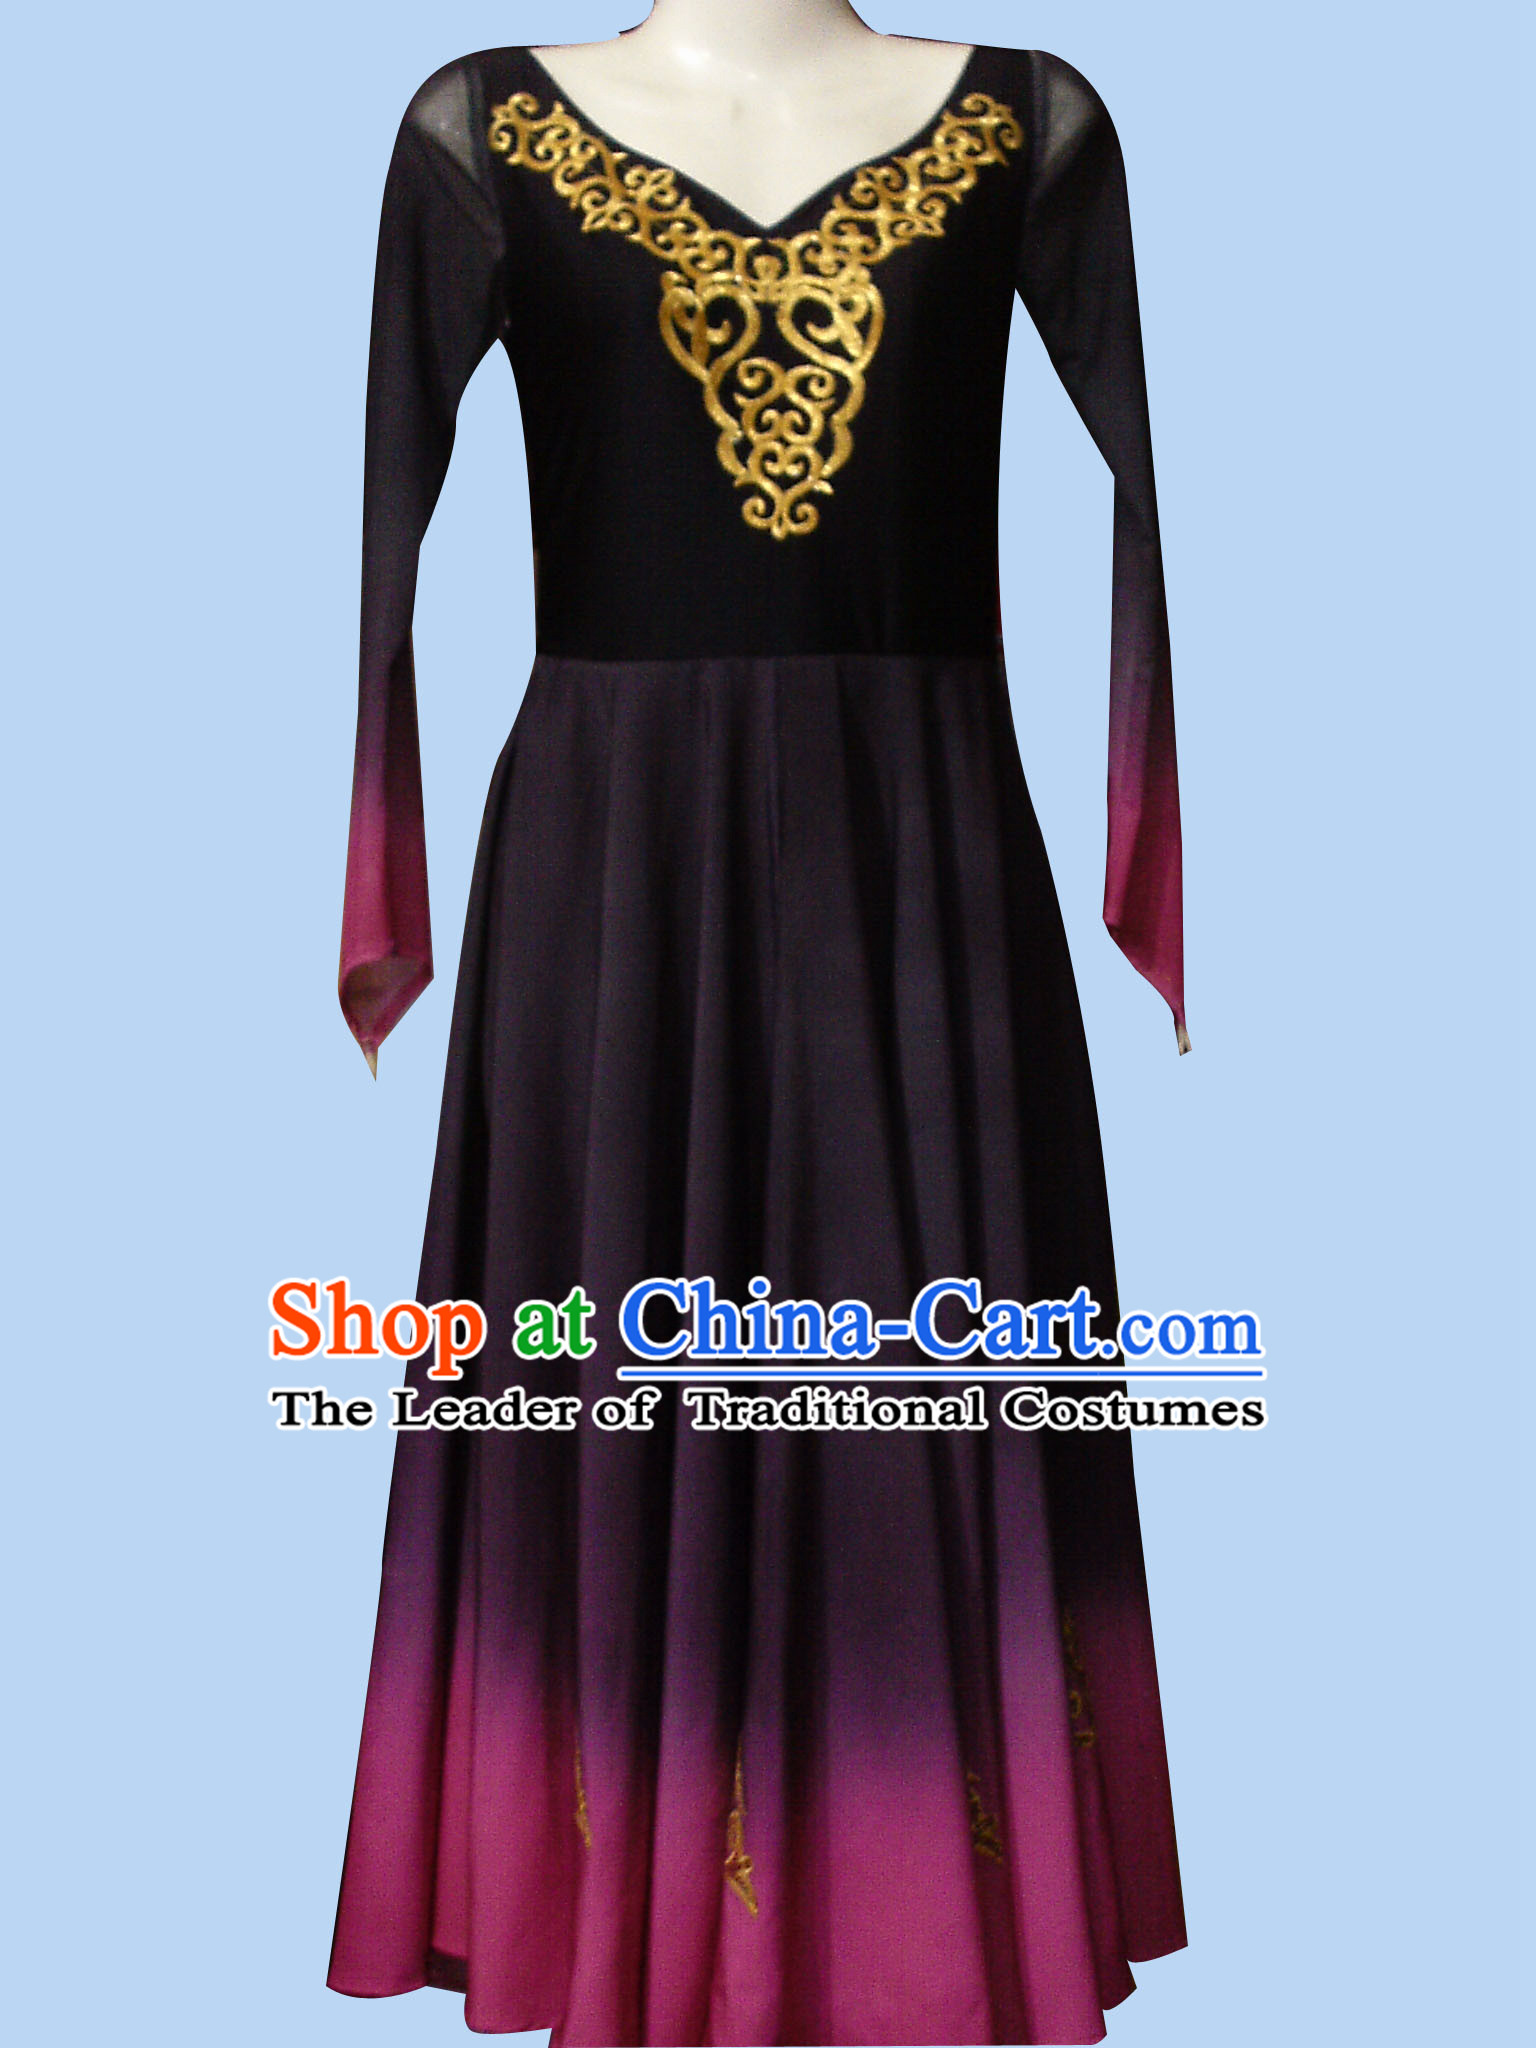 Top Chinese Xinjiang Ethnic Dance Costume Competition Dance Costumes Set